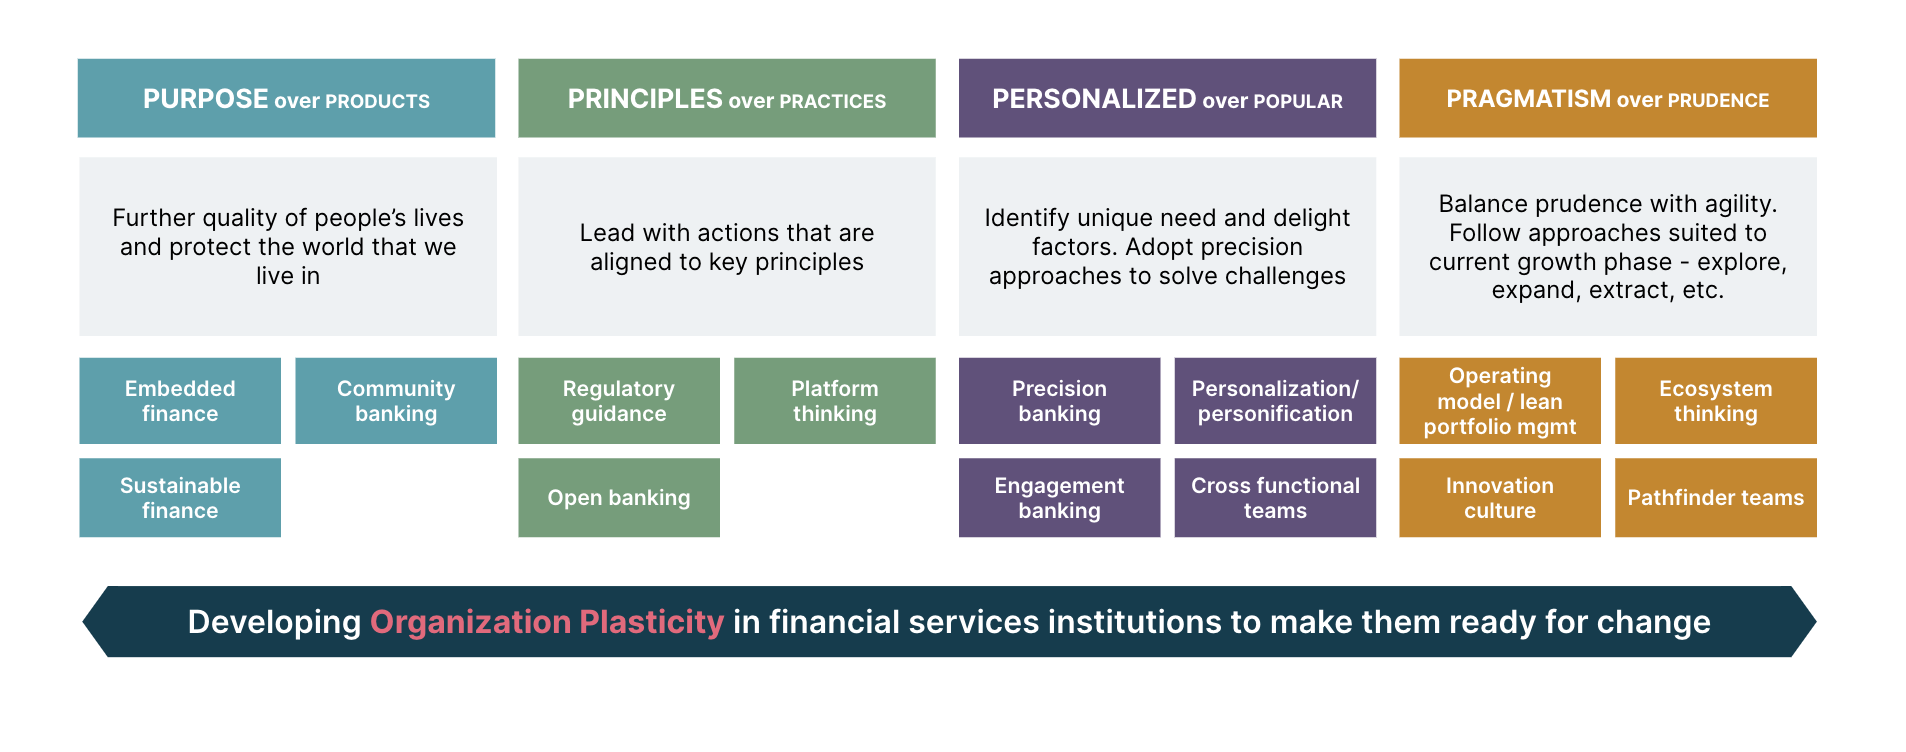 The 4Ps model empowers financial services organizations to adapt and evolve by reorienting to become relevant 